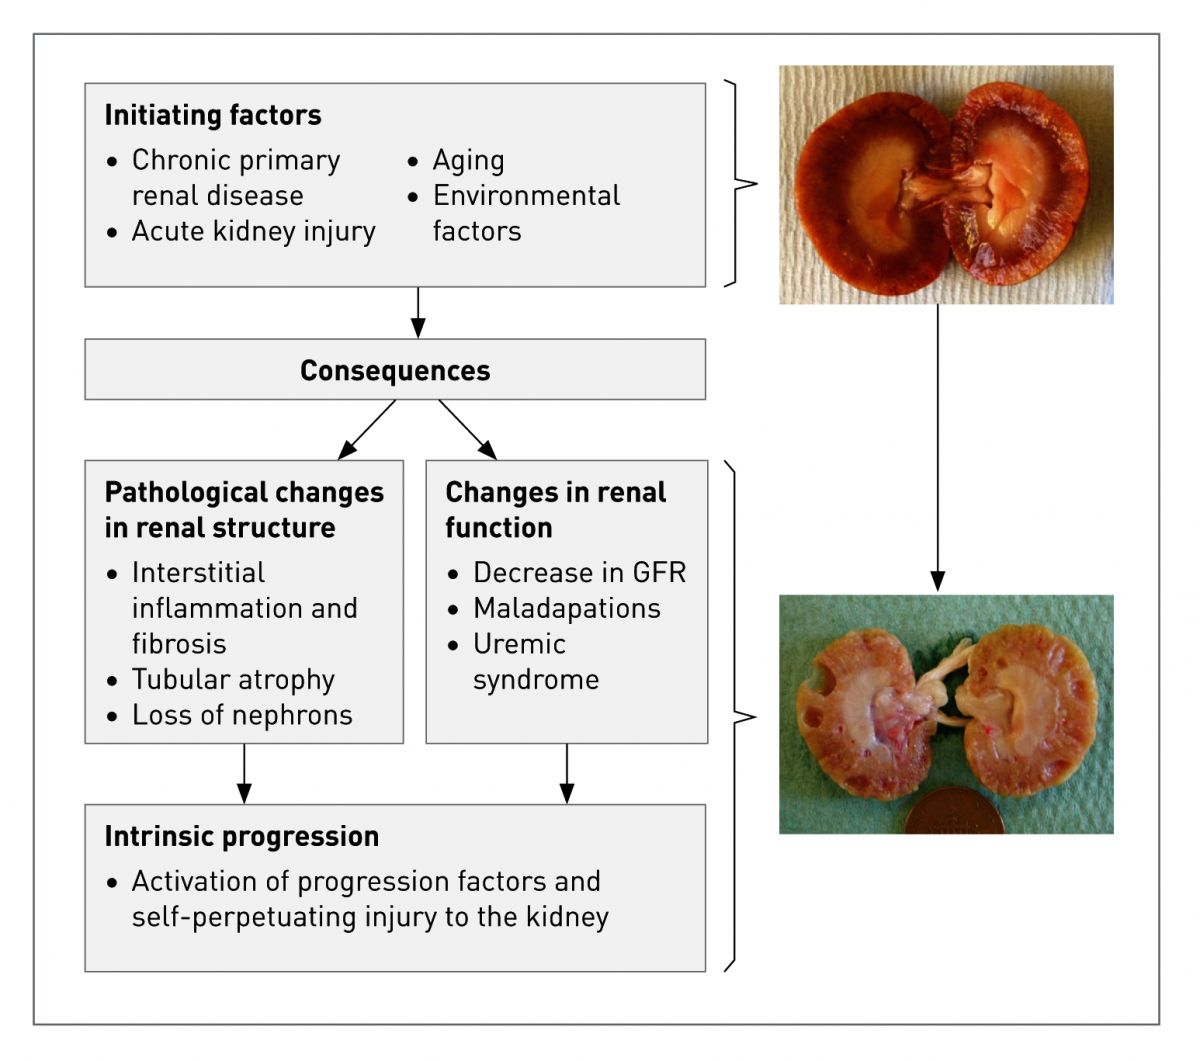 The generally accepted proposed mechanism for initiation and progression of chronic kidney disease. Initiating factors lead to the “consequences”: changes in renal structure and function. As the disease progresses and significant nephron loss occurs, maladaptive responses intrinsic to the cat further contribute to renal damage and nephron loss. Images of the dissected kidney illustrate a healthy kidney (above) and end stage CKD kidney (below).